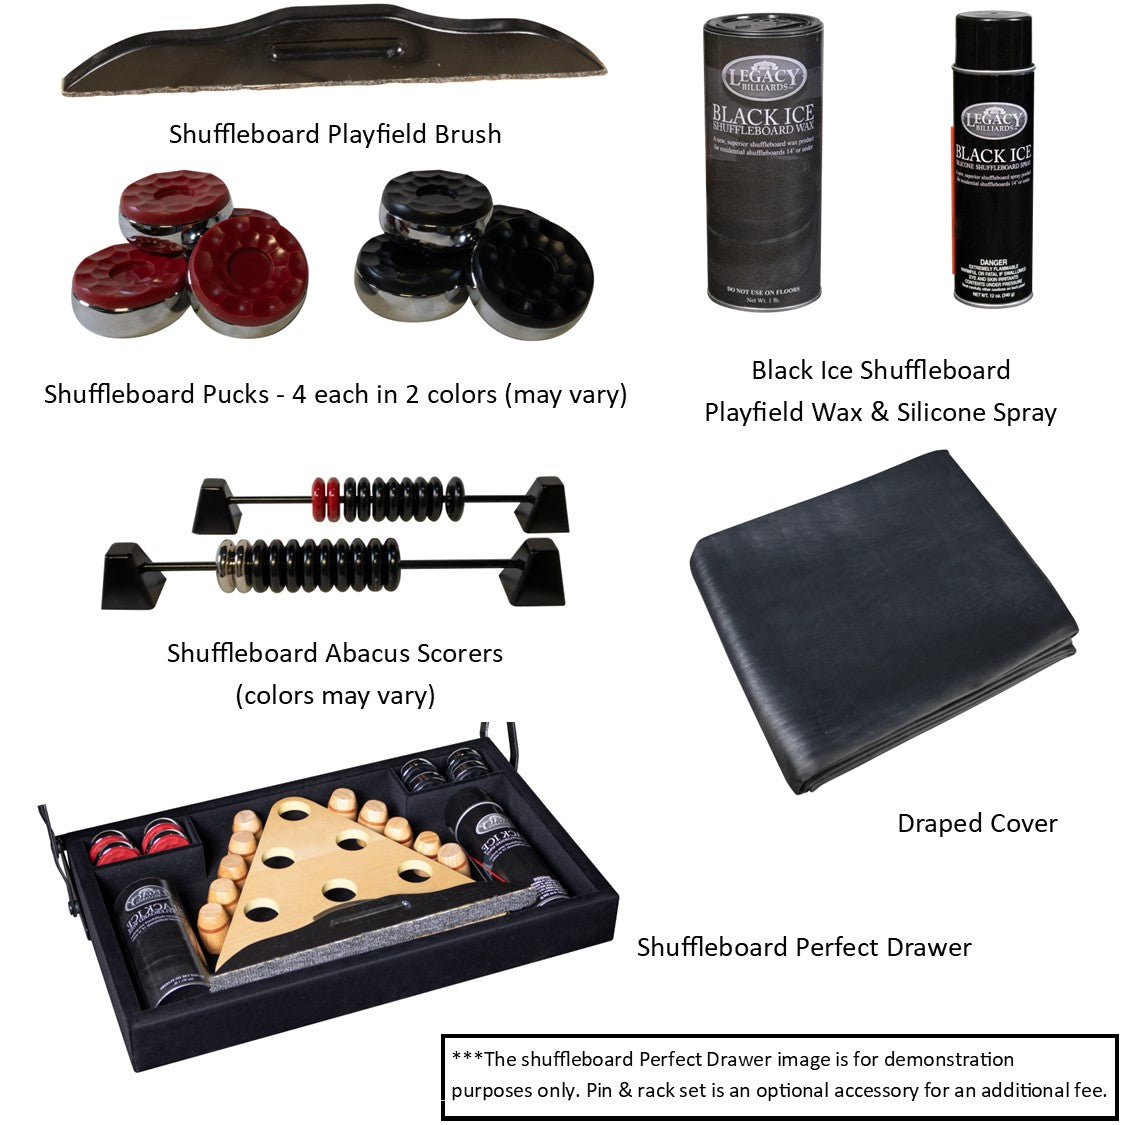 Accessories Included With the Purchase of a Legacy Brand Shuffleboard Table Including Perfect Drawer